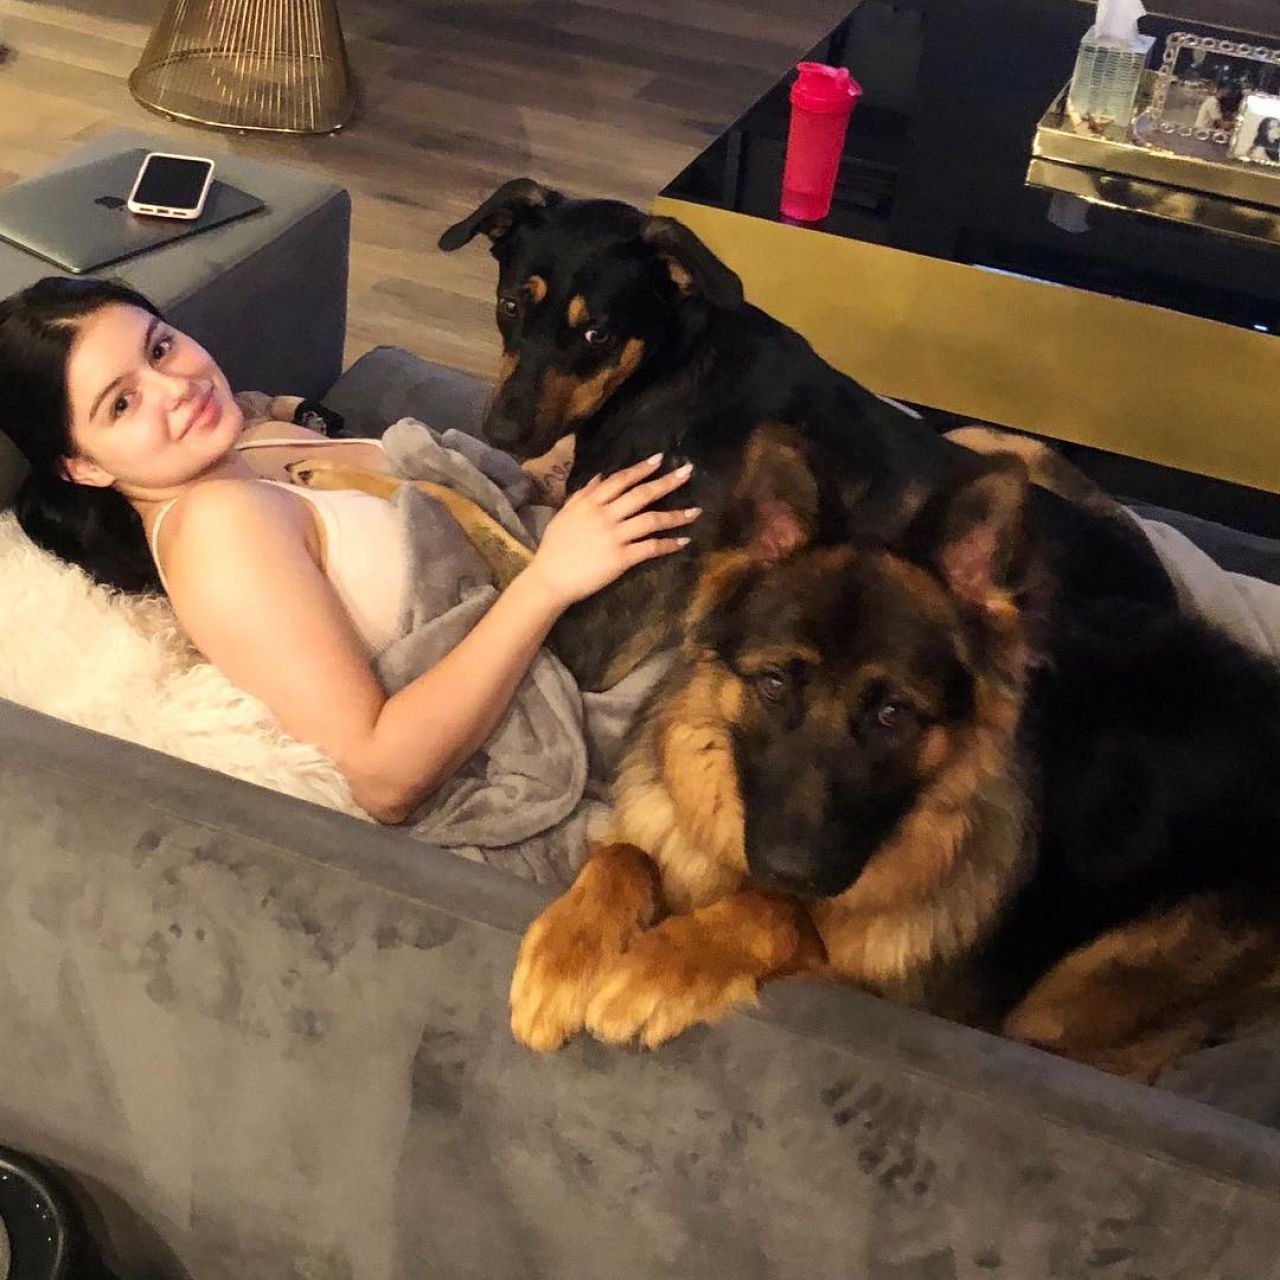 Ariel Winter Has A Soft Spot For Dogs: Get To Know Her Pets